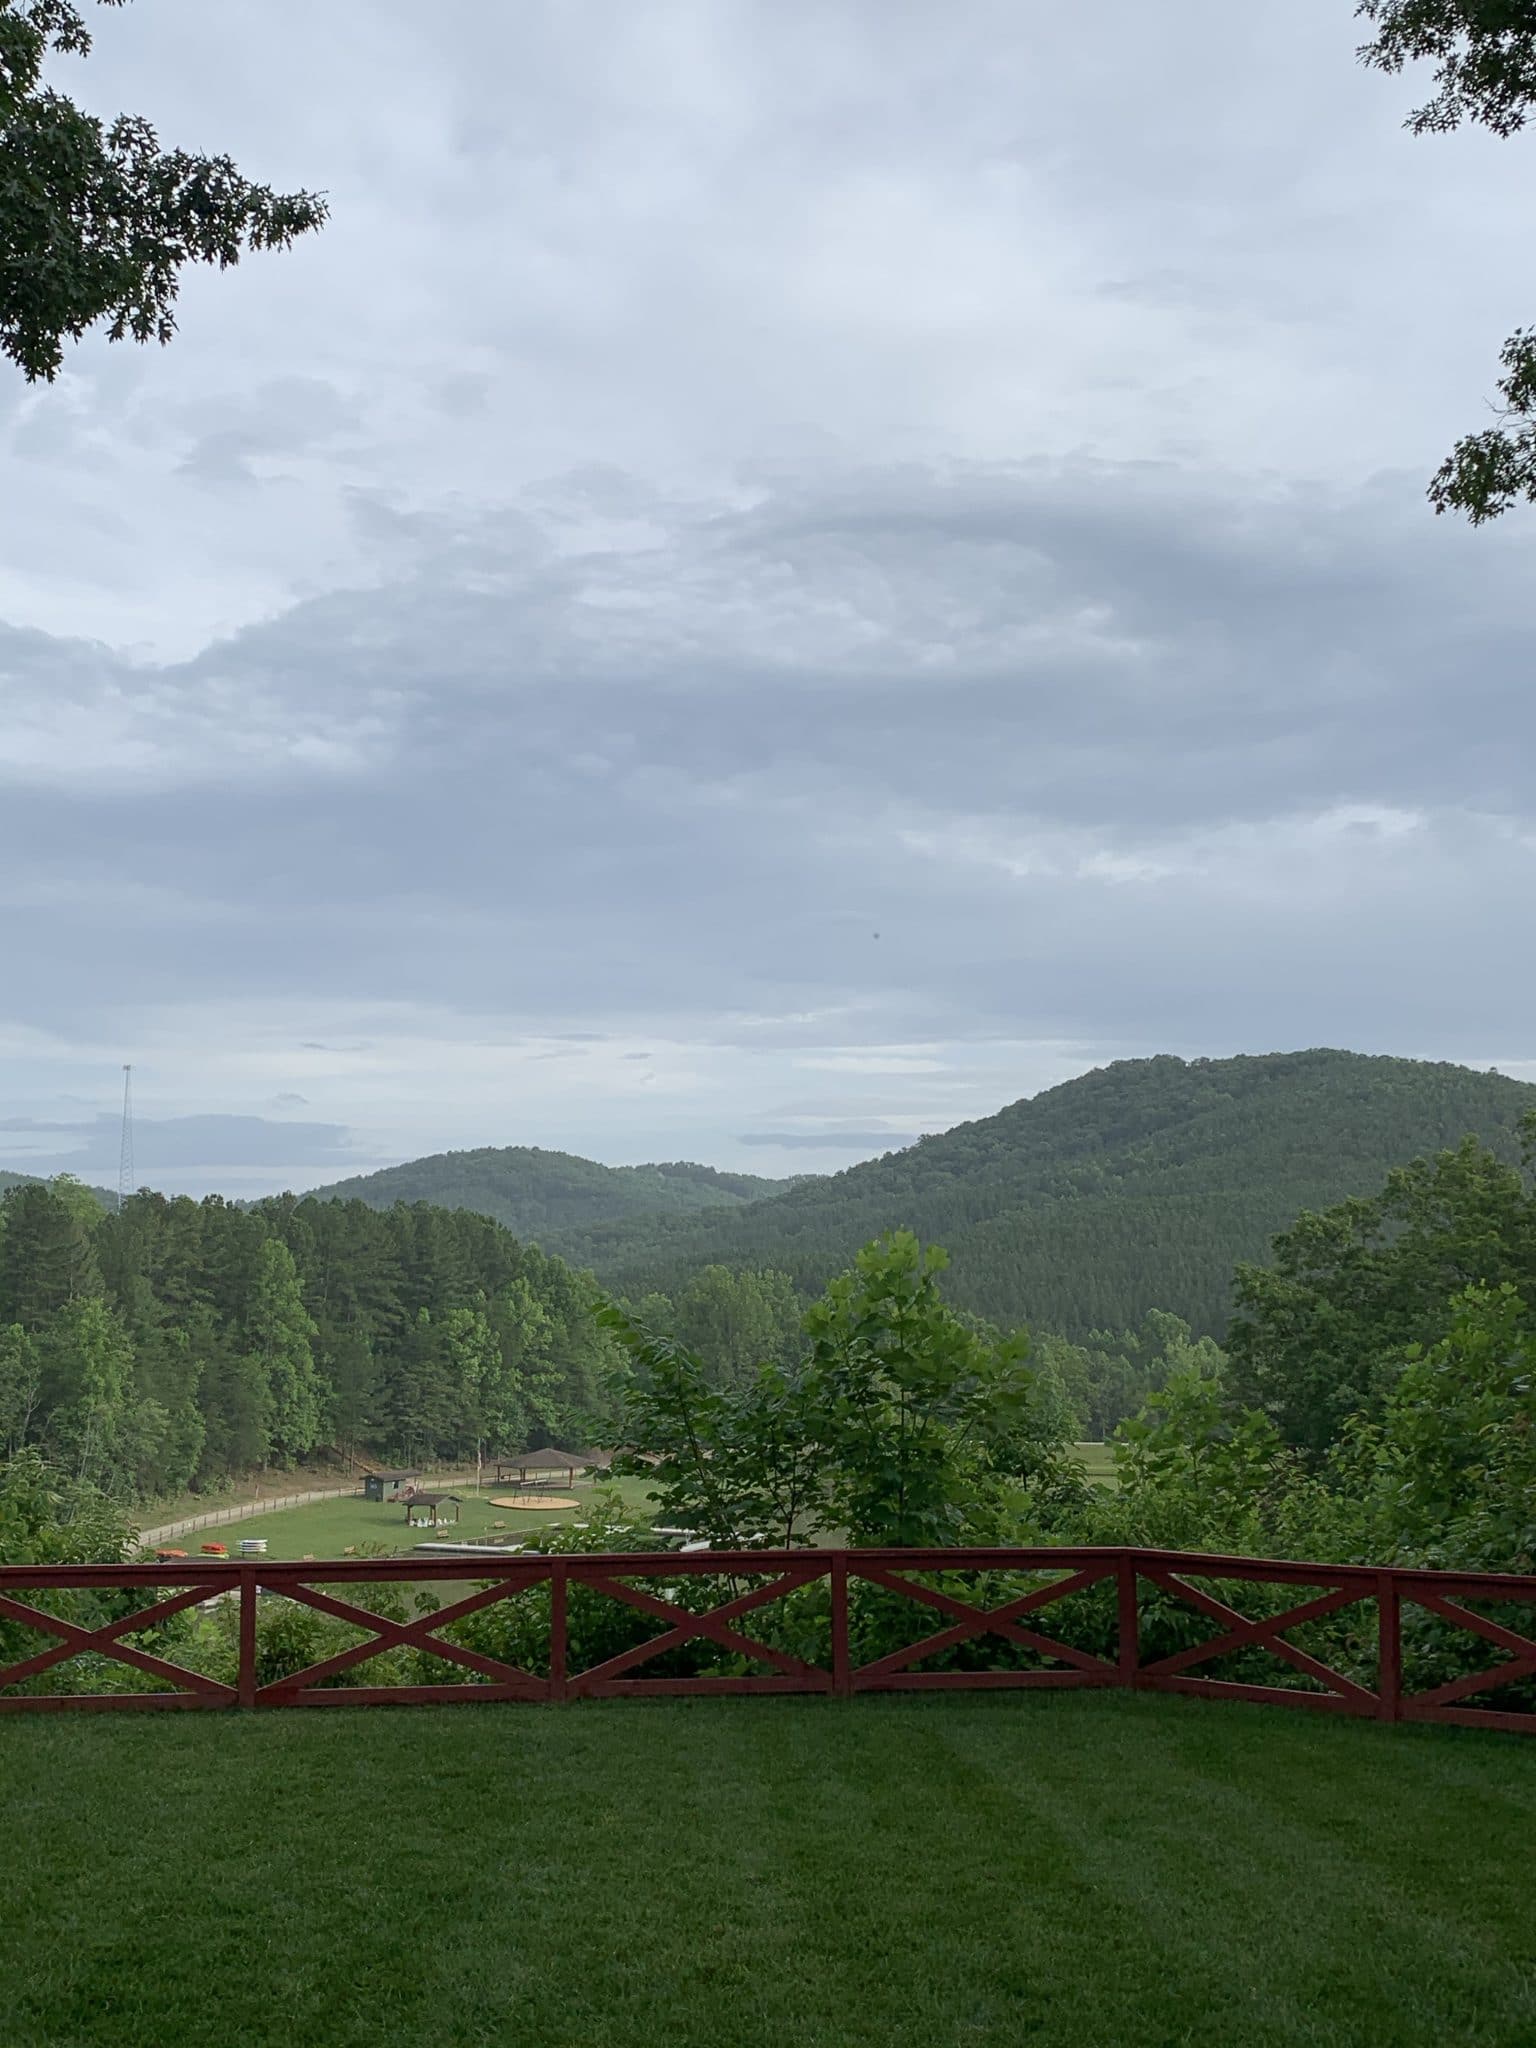 Jellystone Golden Valley, North Carolina Camping, Golf Cart rentals, Stilettos and Diapers